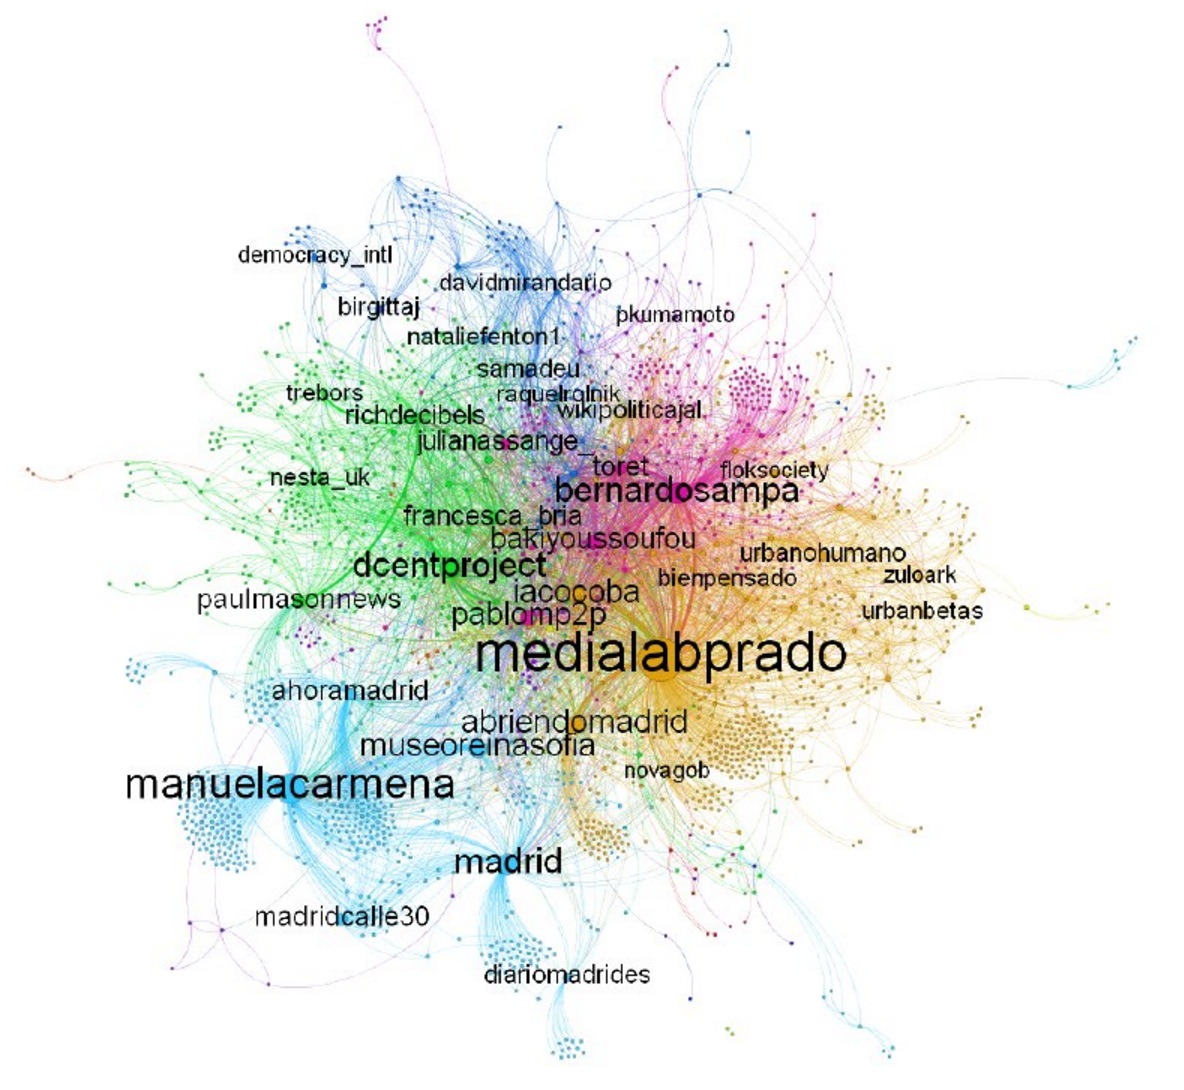 The network resulting from the #DCENTMadrid, #DemocraticCities, #CiudadesDemocraticas, Democratic Cities event organized on the 23–28 May 2016. Picture by Pablo Aragón and Alberto Bicho.